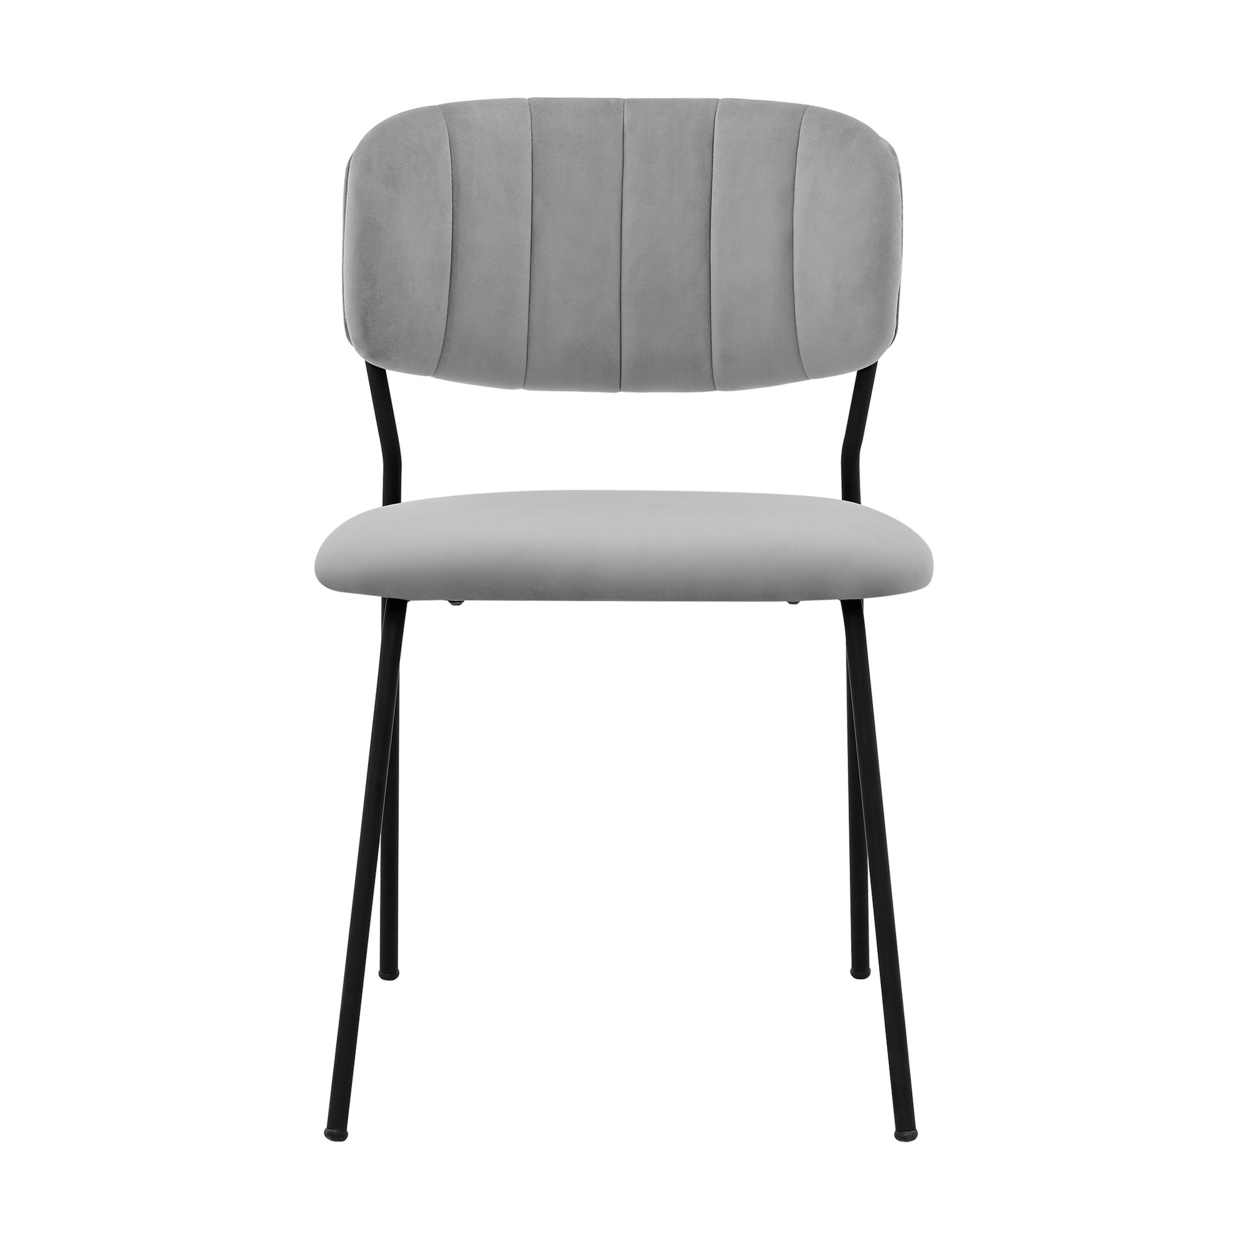 Metal Dining Chair With Fabric Seats,Set Of 2,Black And Gray- Saltoro Sherpi